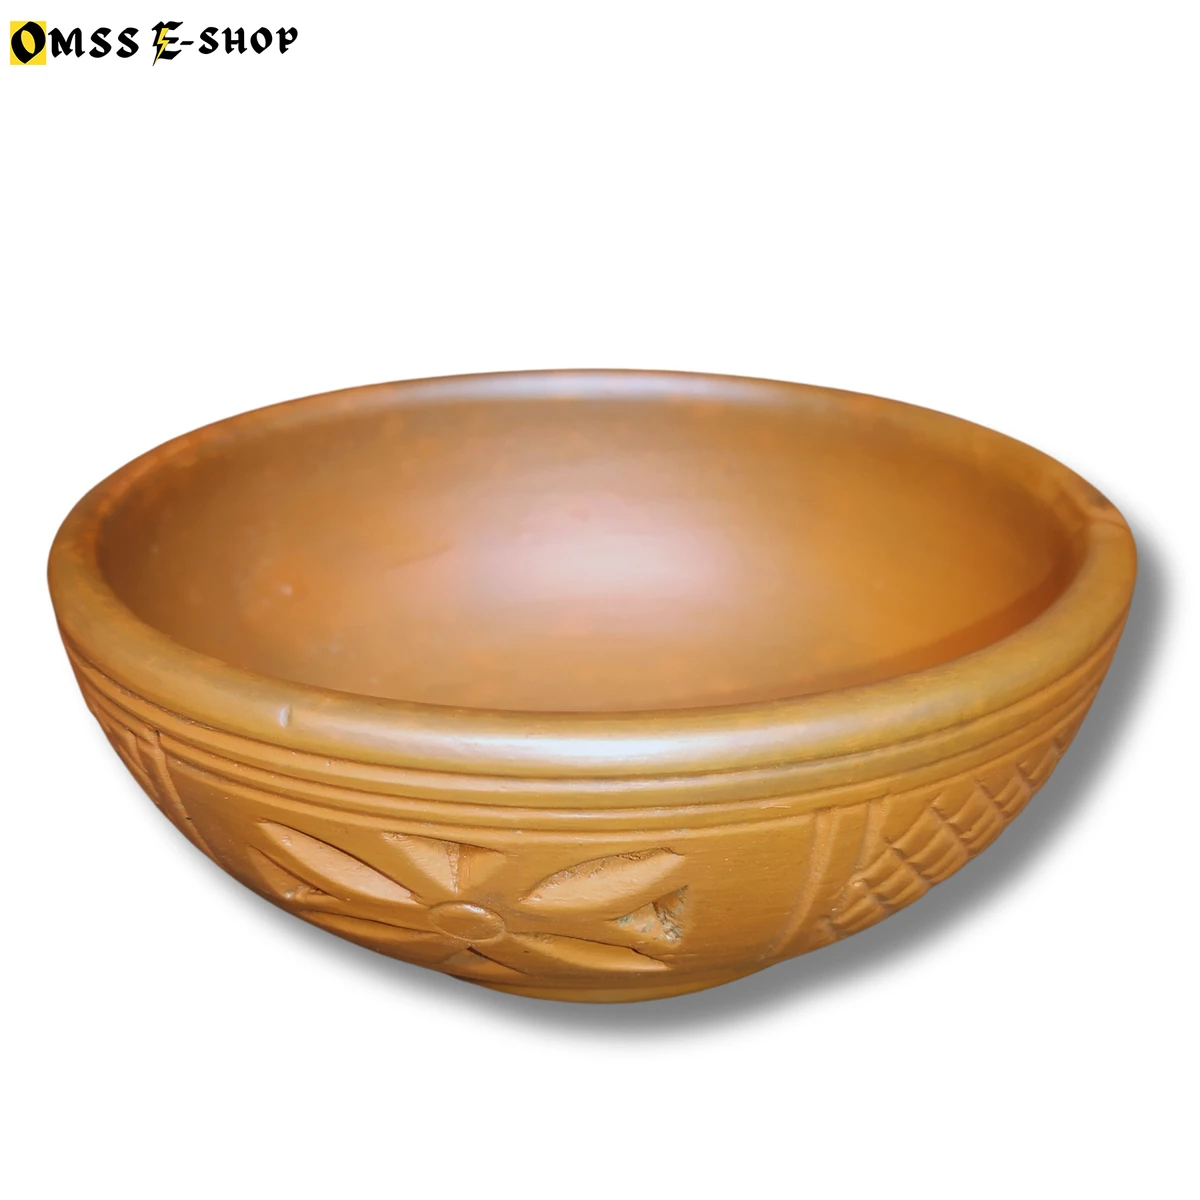 Beautiful and durable terracotta clay bowl